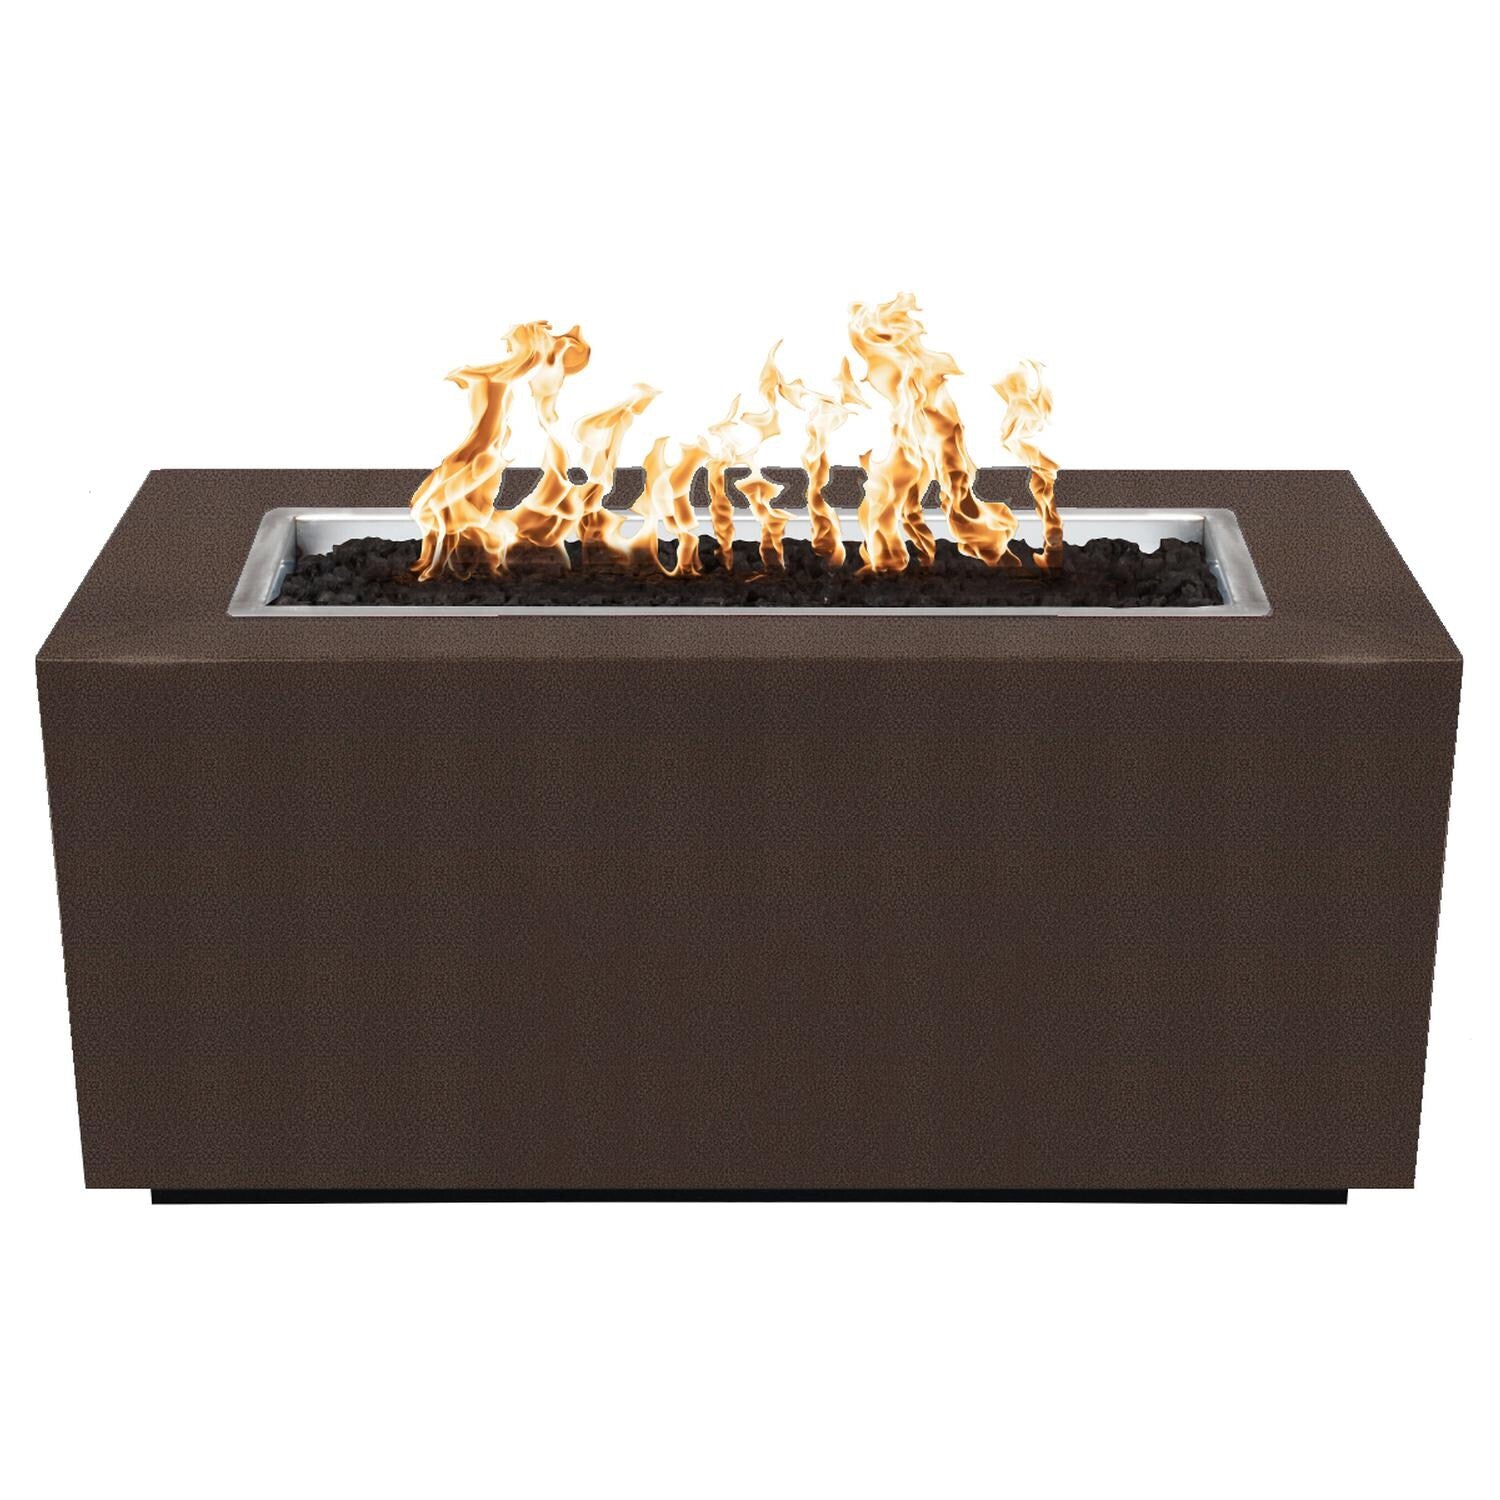 The Outdoor Plus Pismo Metal Fire Pit